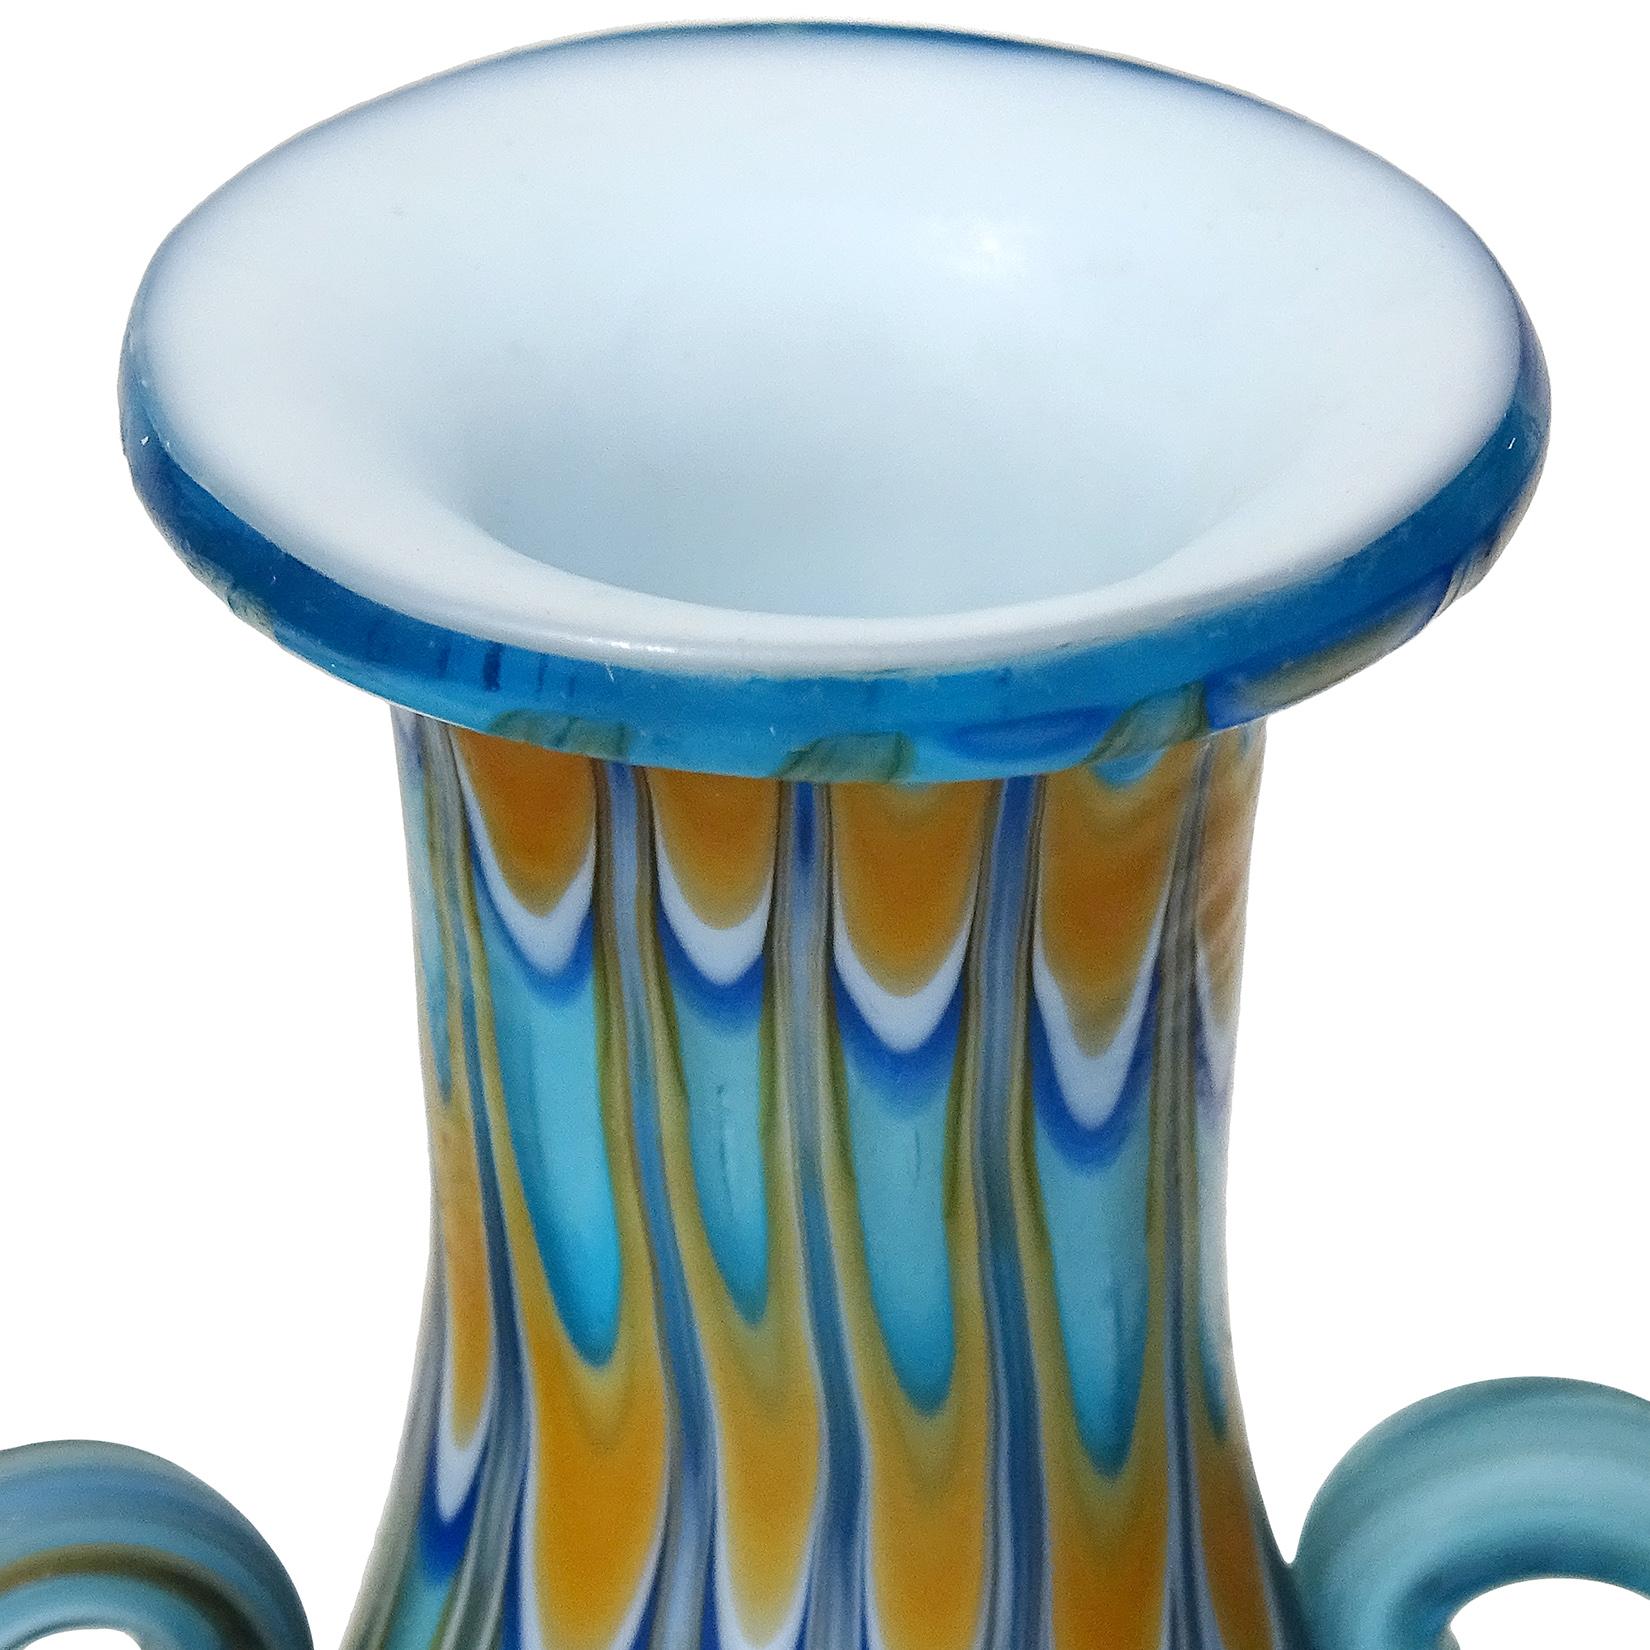 Beautiful antique Murano hand blown cobalt and sky blue, orange, and white Italian art glass decorative double handle cabinet vase. Documented to the Fratelli Toso company, circa 1900-1920. The vase has an early design and unusual color combination.